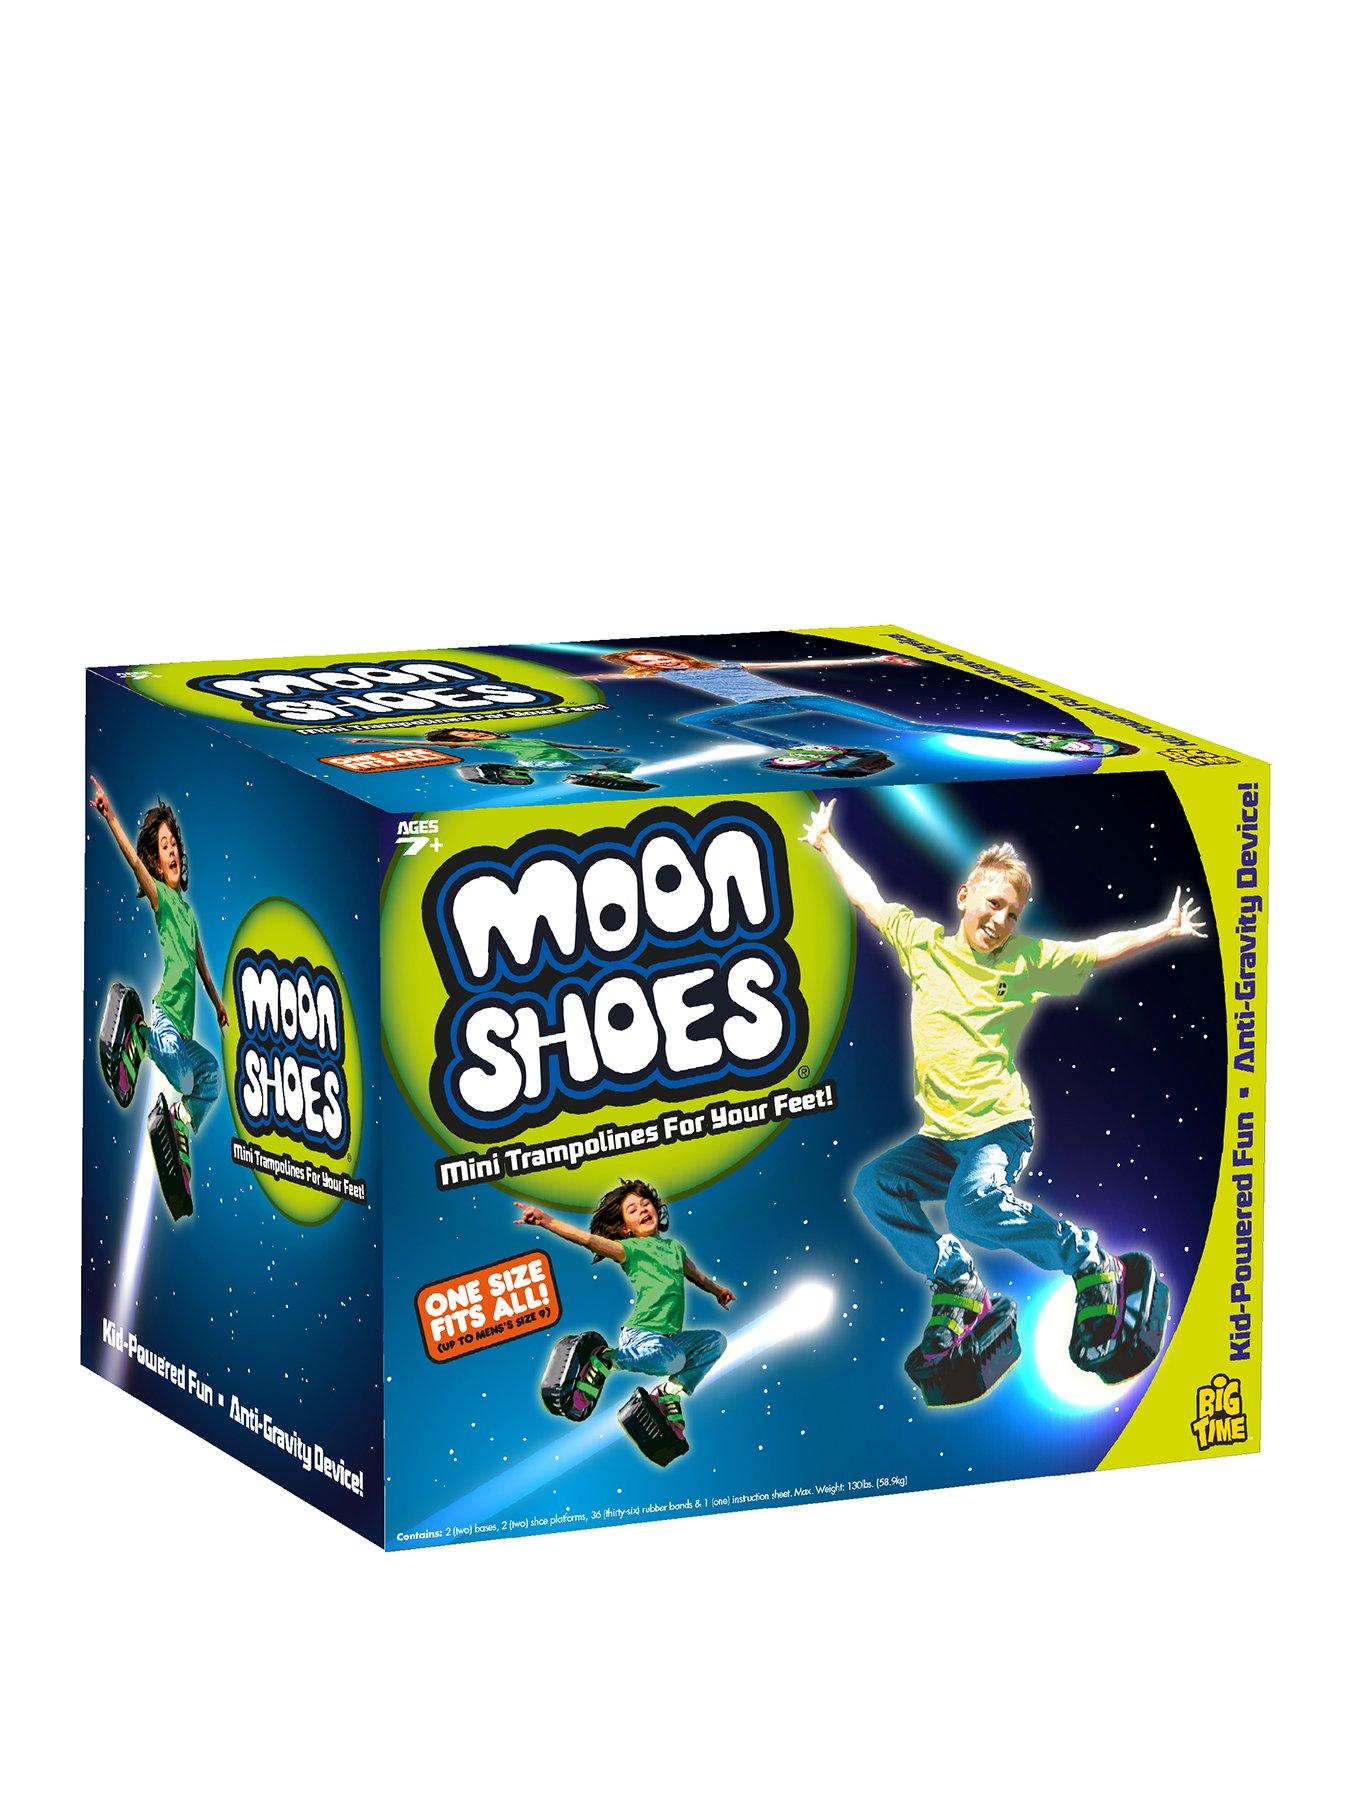 Moon Shoes Bouncy Shoes, Mini Trampolines for Your Feet, One Size, Black,  New and Improved, Bounce Your Way to Fun, Very Durable, No Tool Assembly